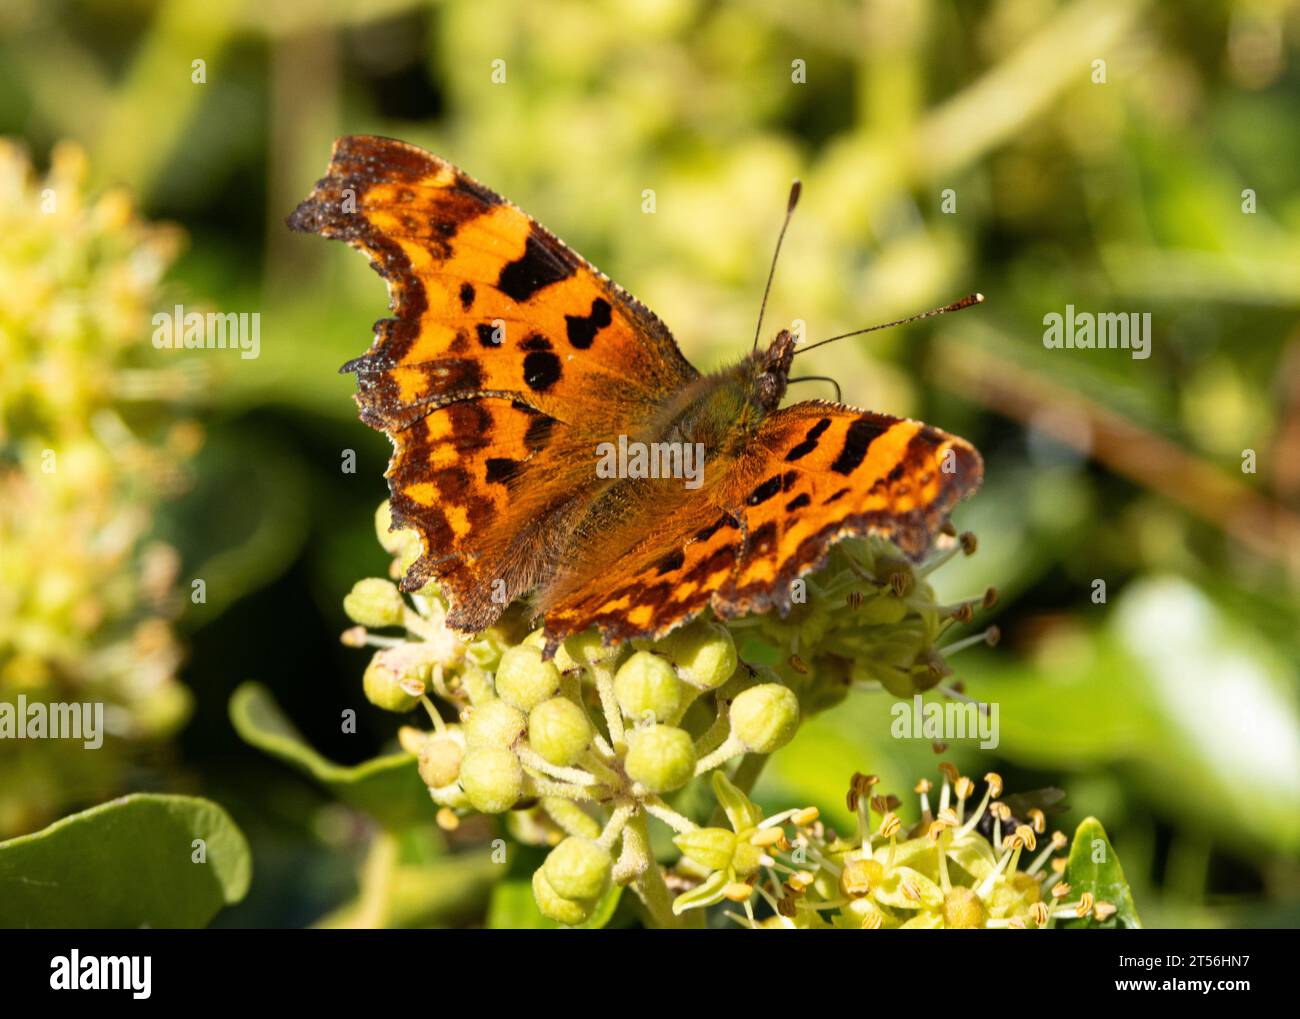 The distinctive scalloped shape of the outer edges of the wings make the Comma an easy butterfly to identify. Stock Photo